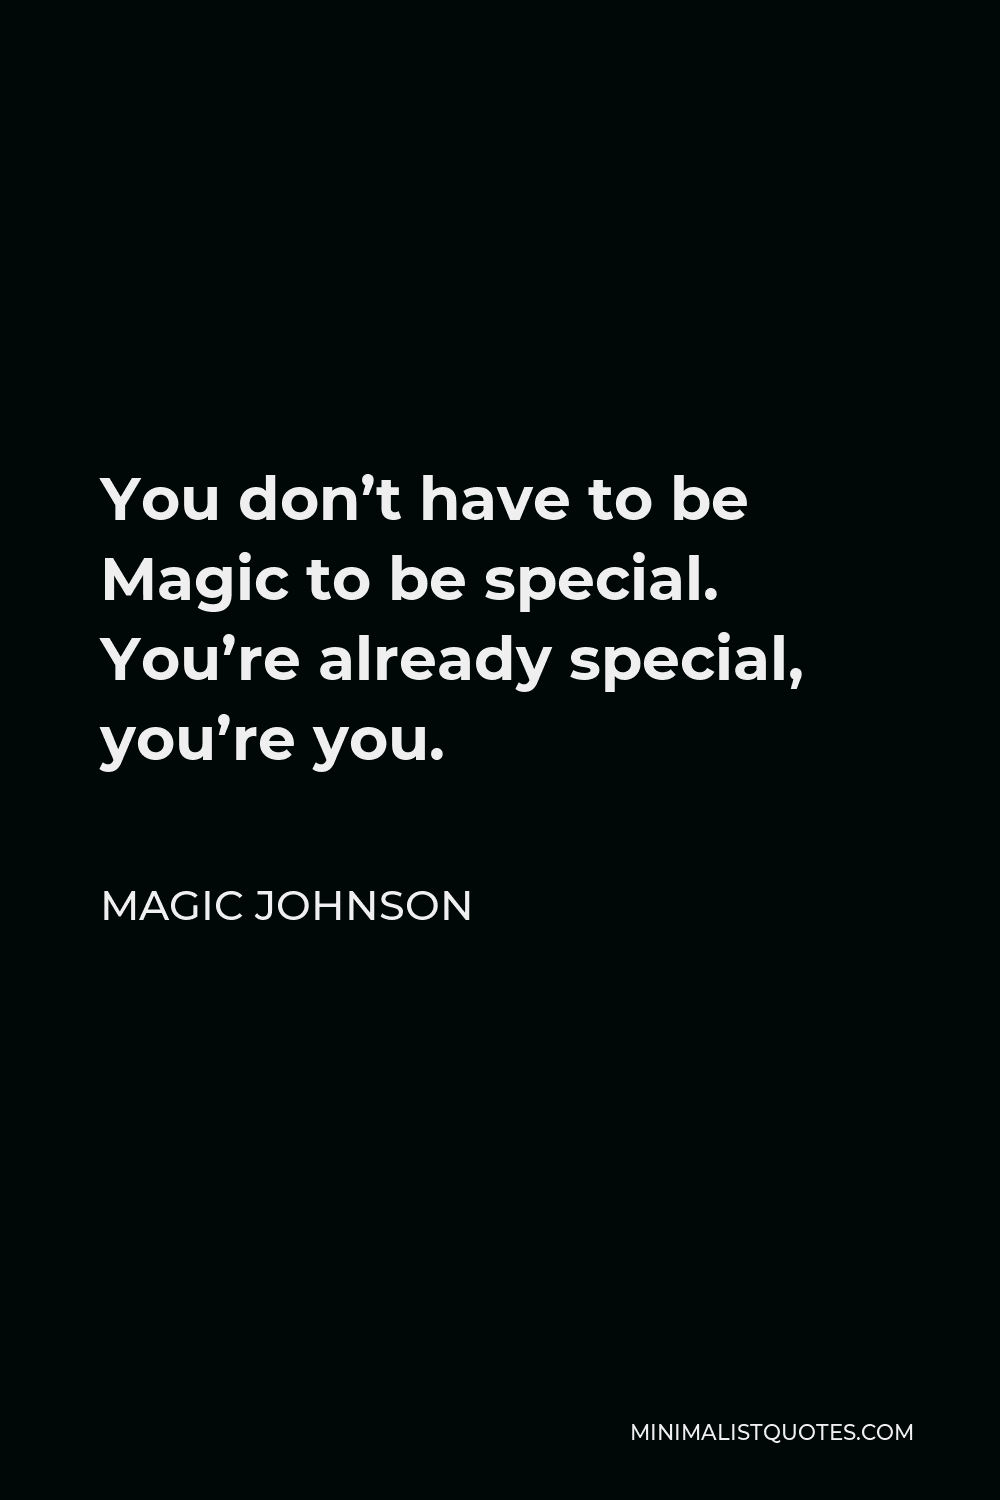 Magic Johnson Quote - You don’t have to be Magic to be special. You’re already special, you’re you.